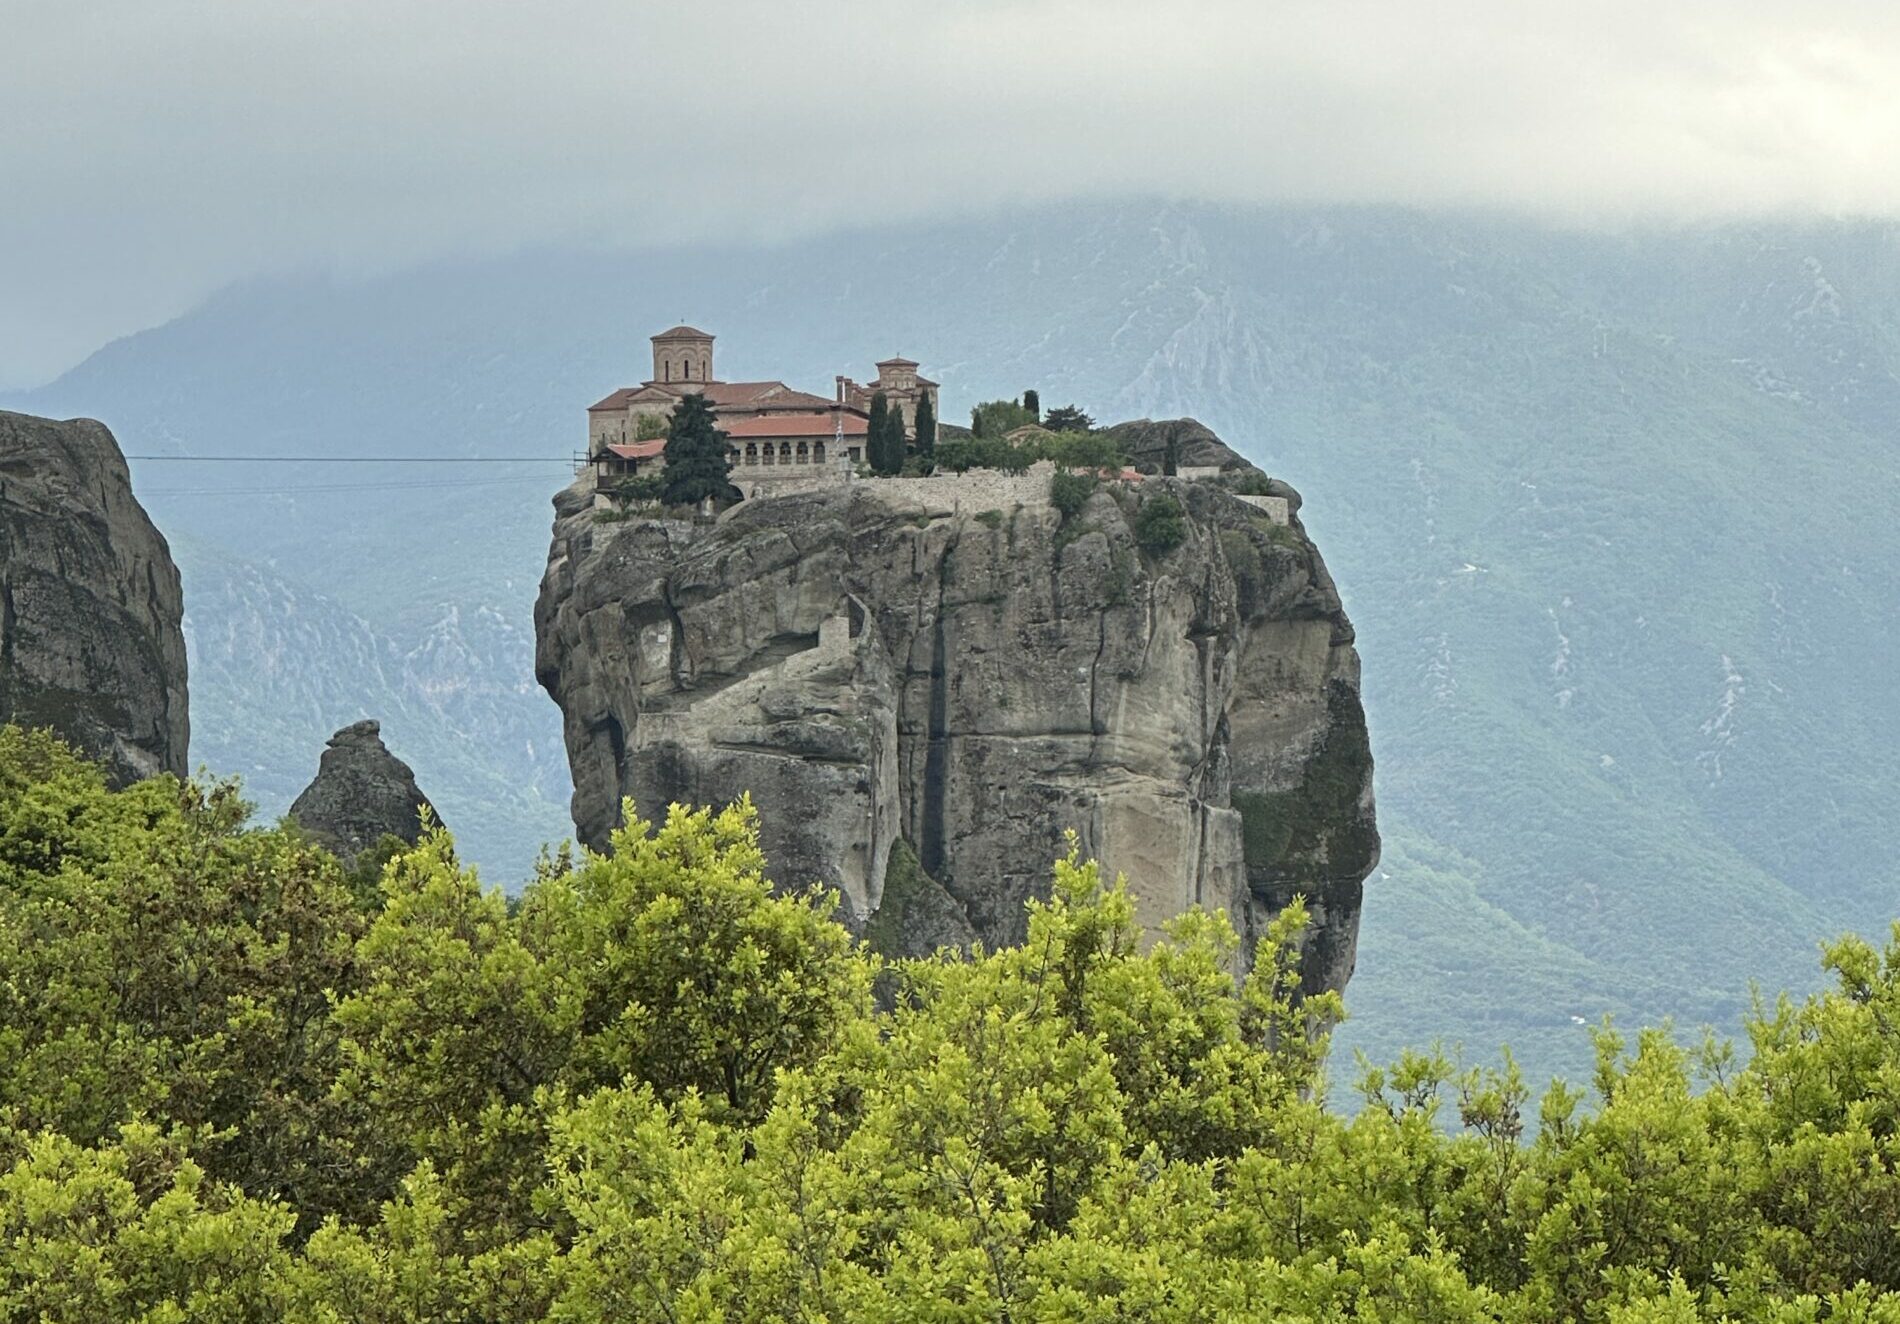 A Meteora monastery perched on the cliffs in Meteora